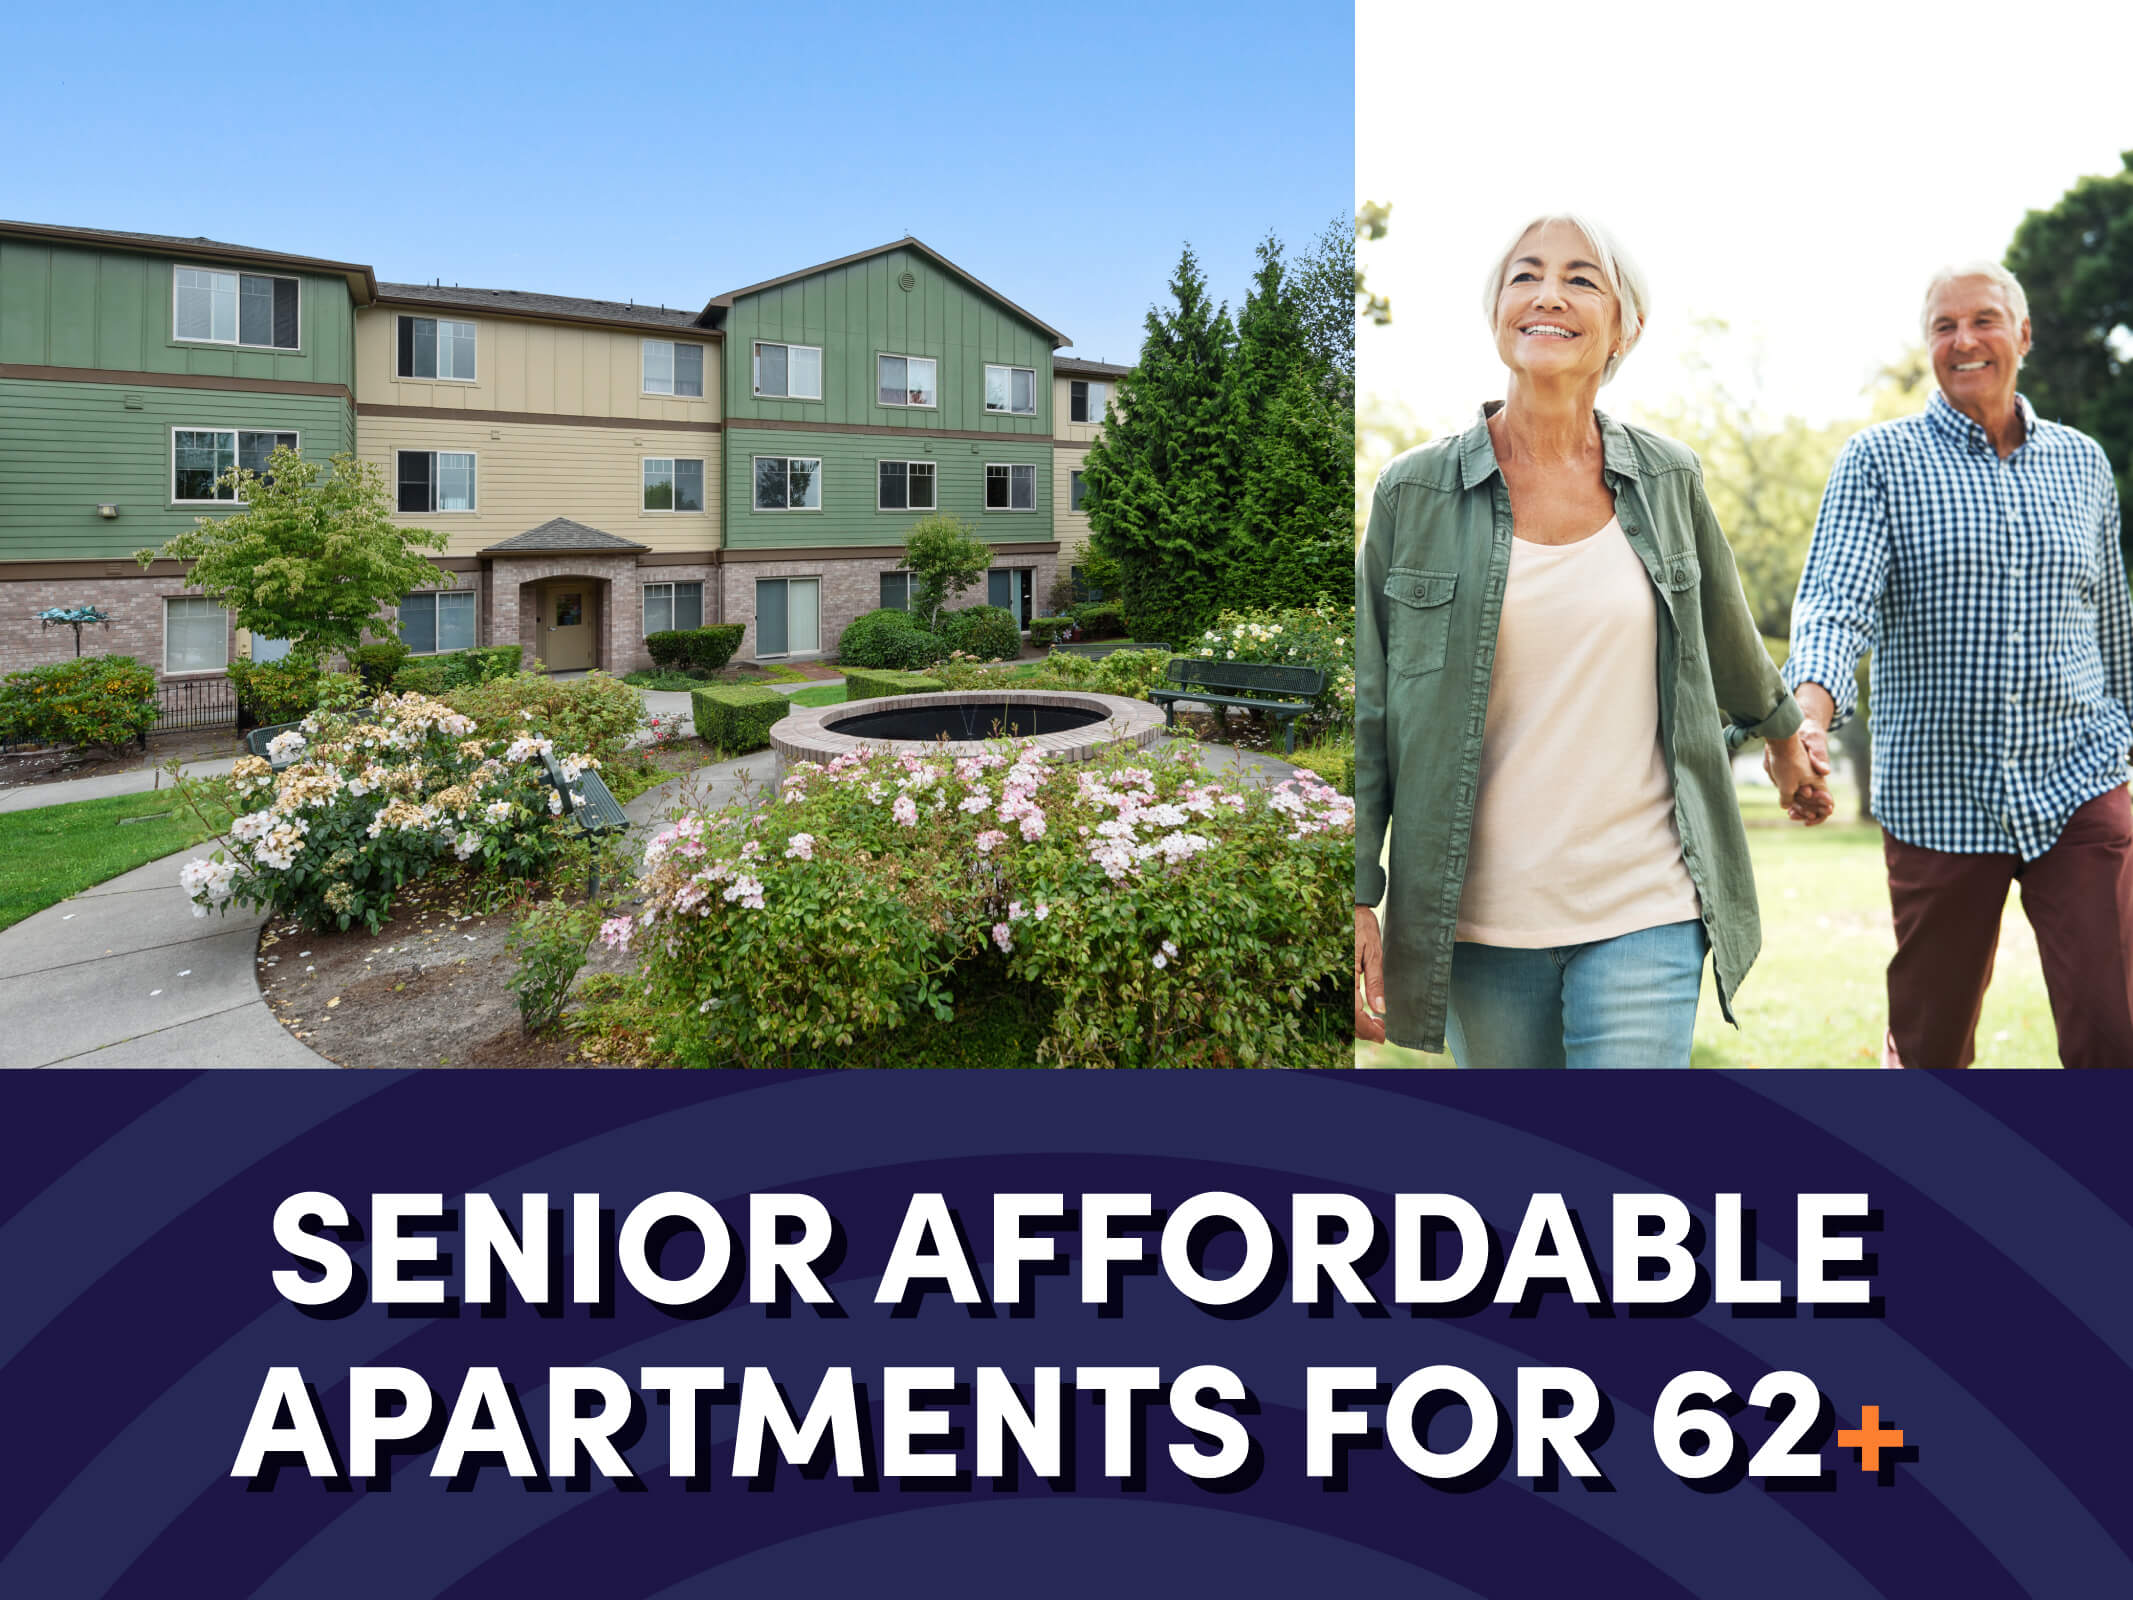 An image of a building exterior next to an image of a senior couple holding hands above text reading “Senior Affordable Apartments for 62+” for the Alderwood Court Senior Affordable Apartments in Lynnwood, Washington.